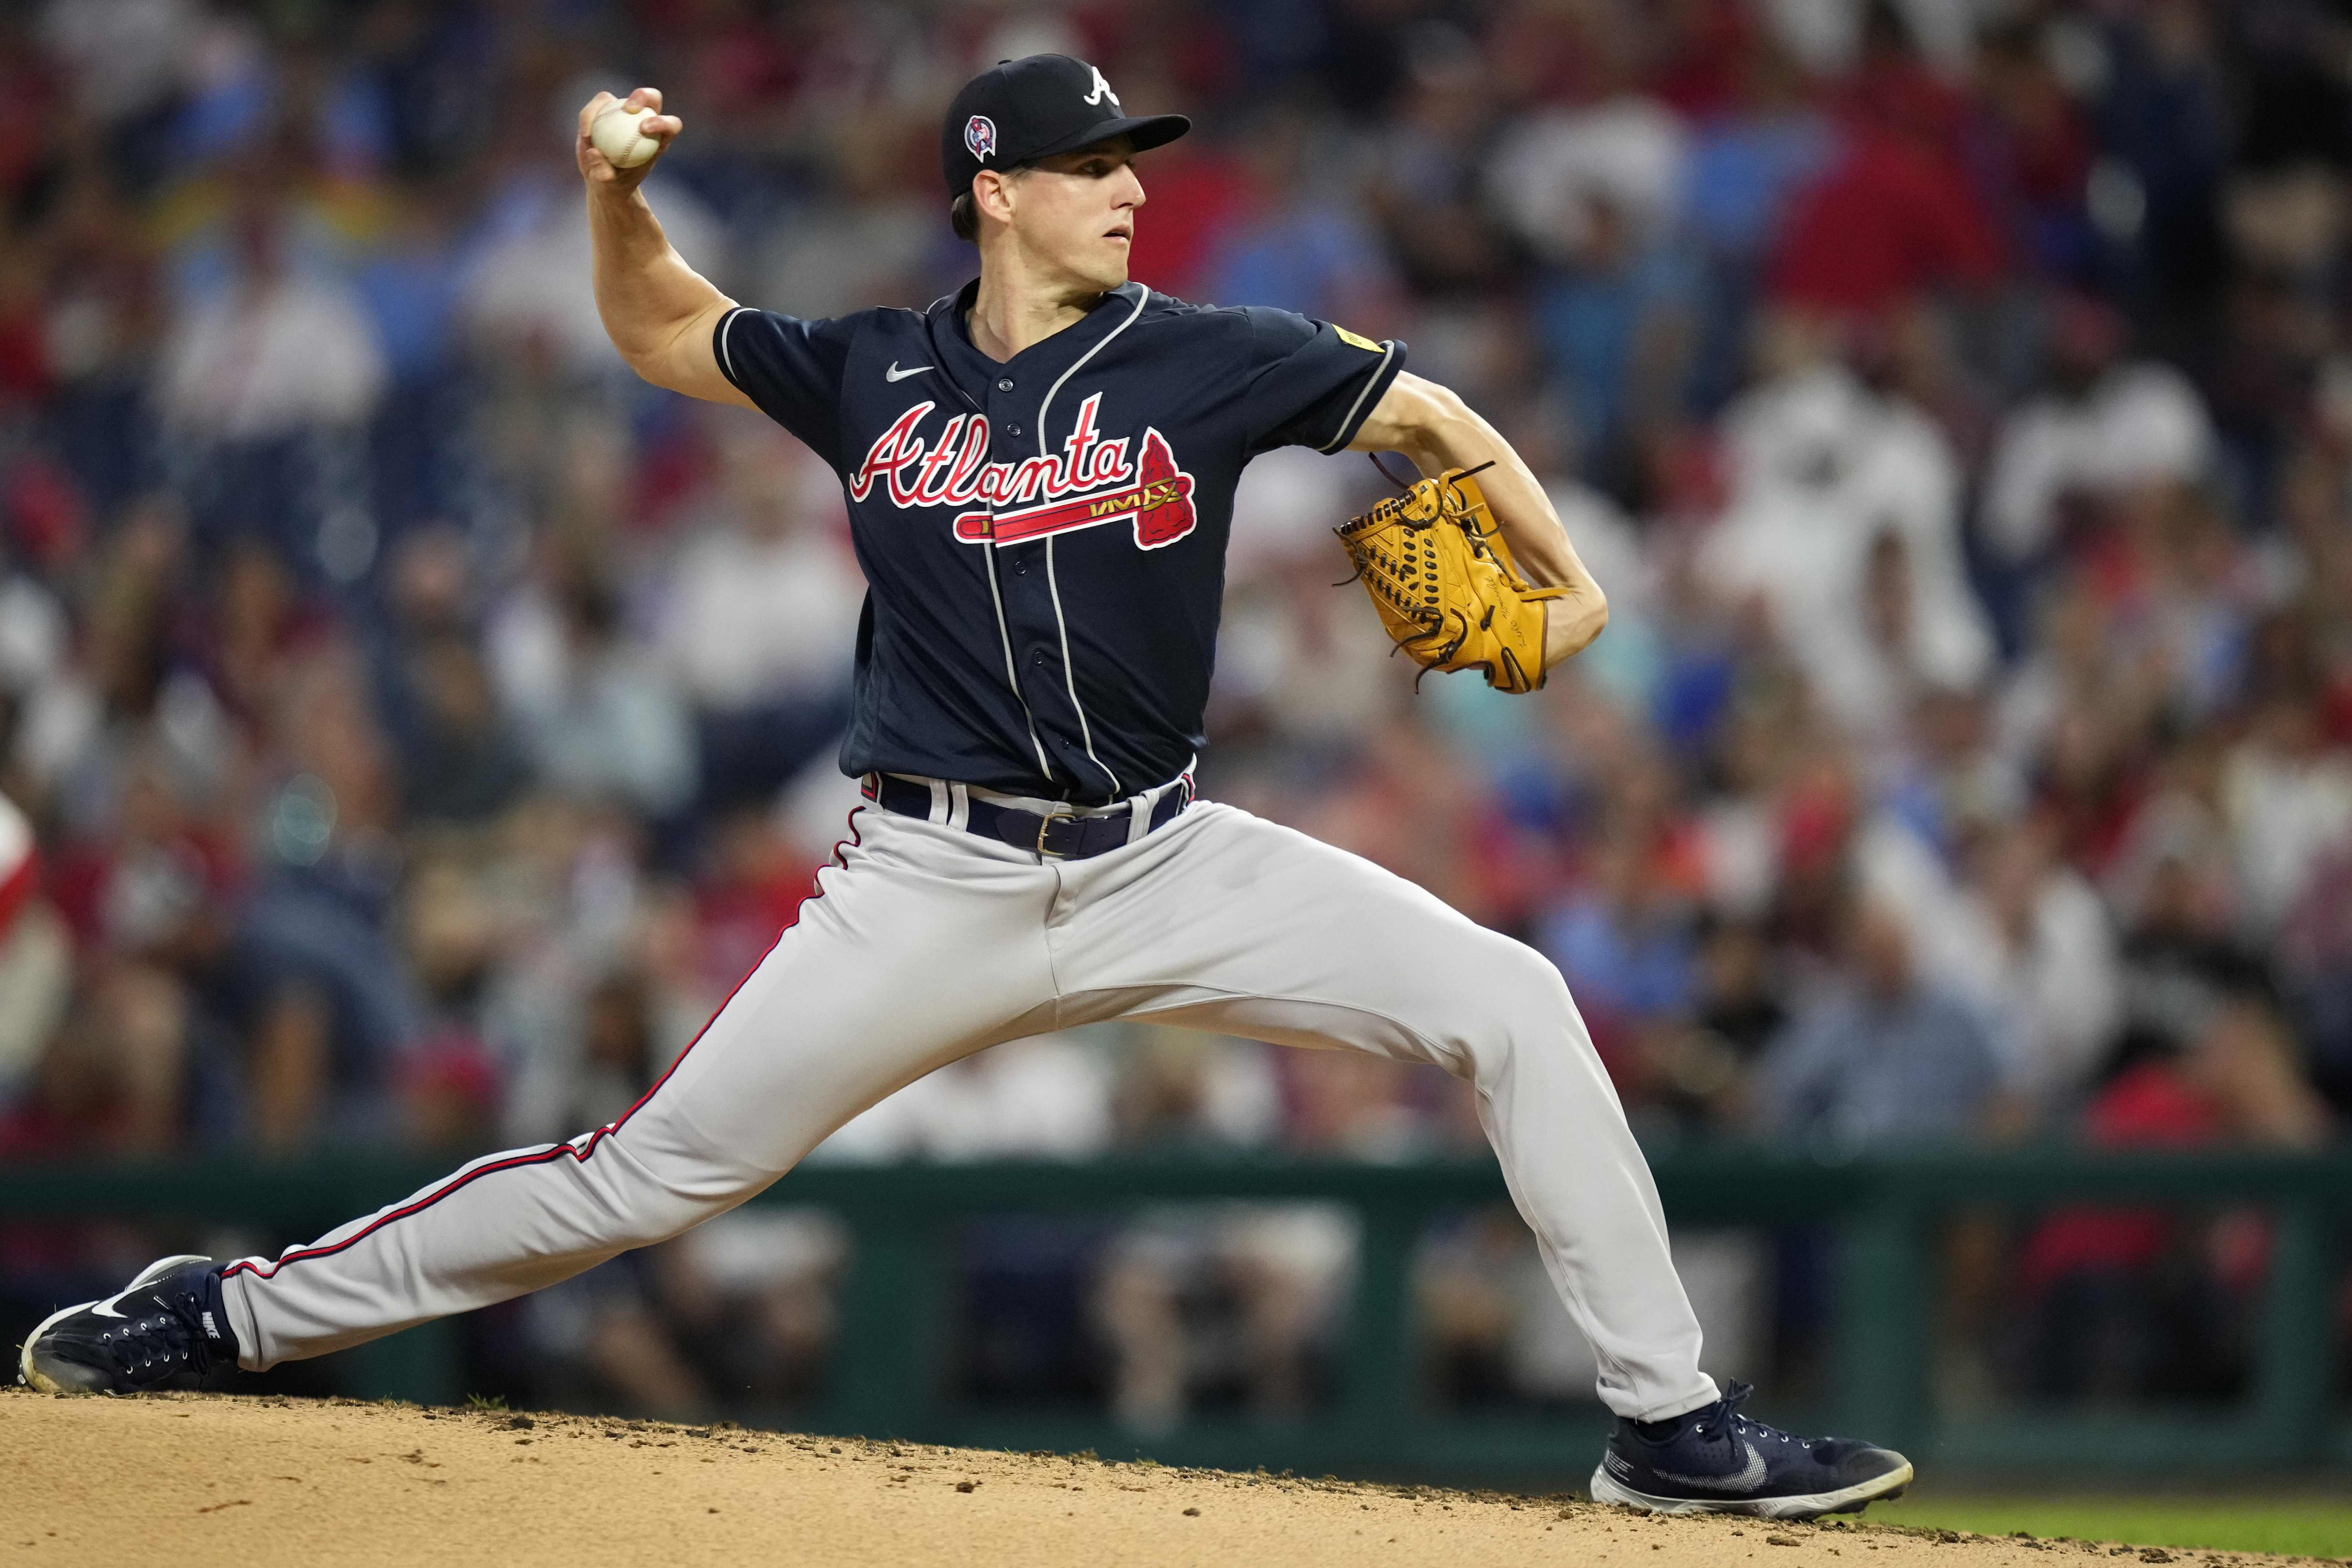 He's easy to root for': Braves' Kyle Wright returns after long injured